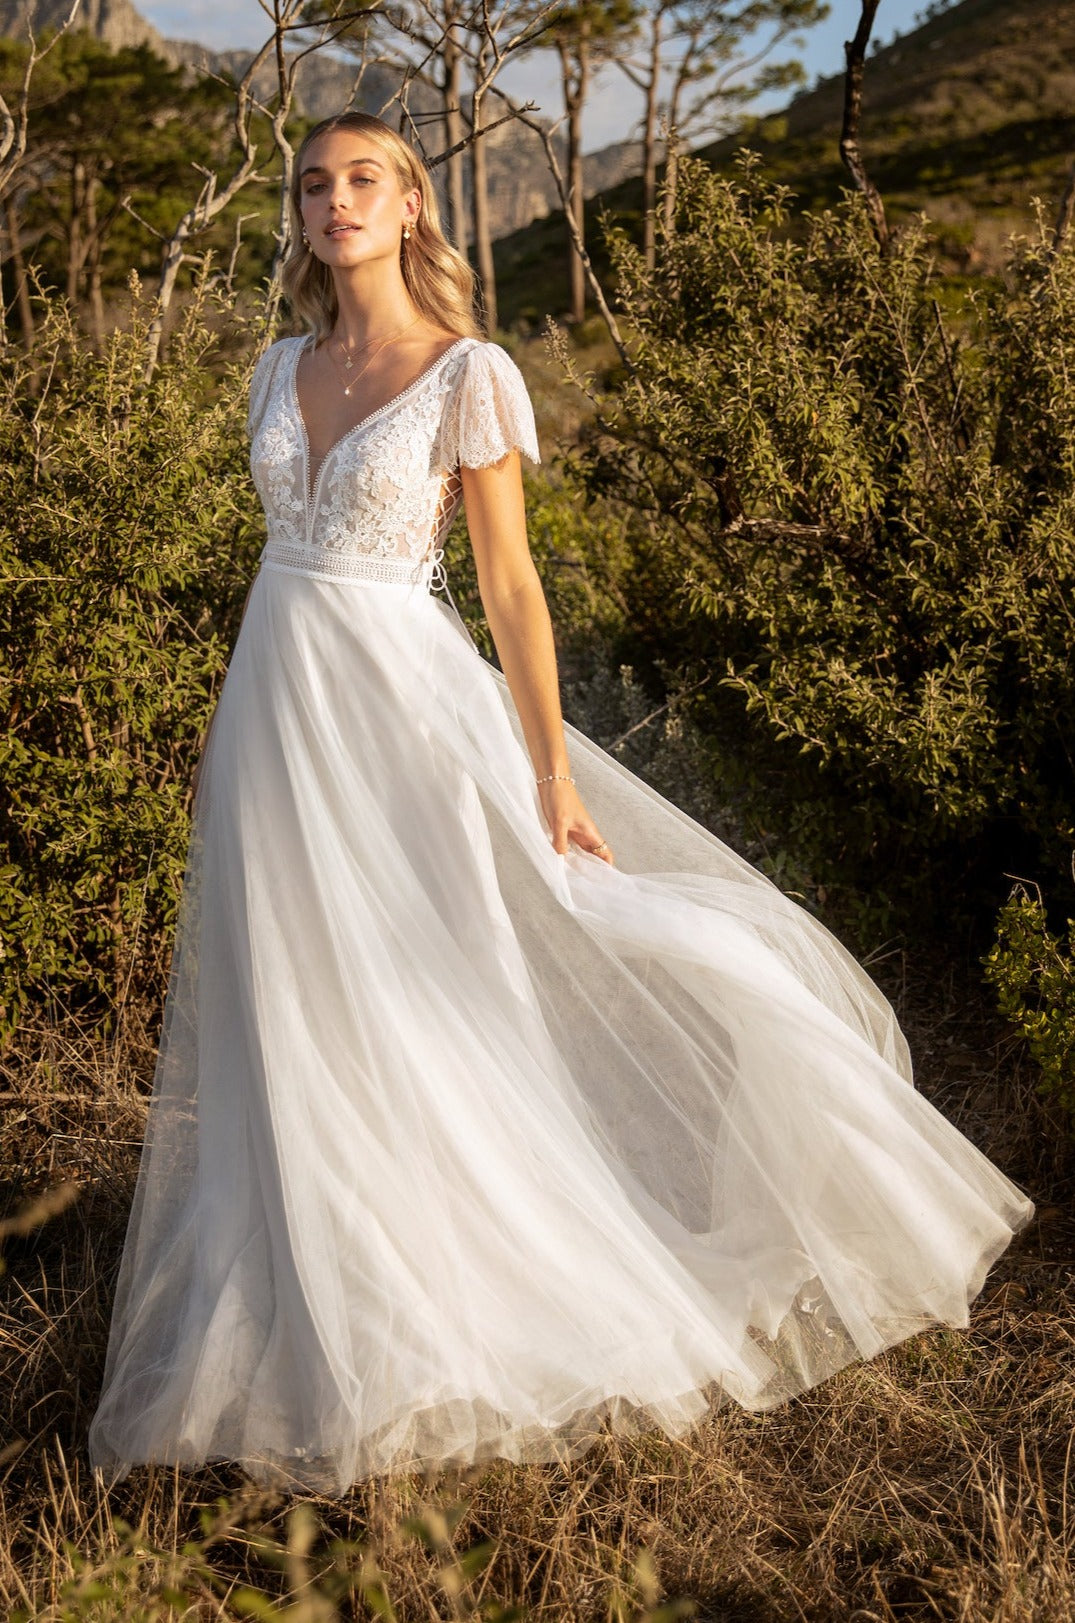 Boho wedding dress in lace and tulle with lace up detail. – Kelsey